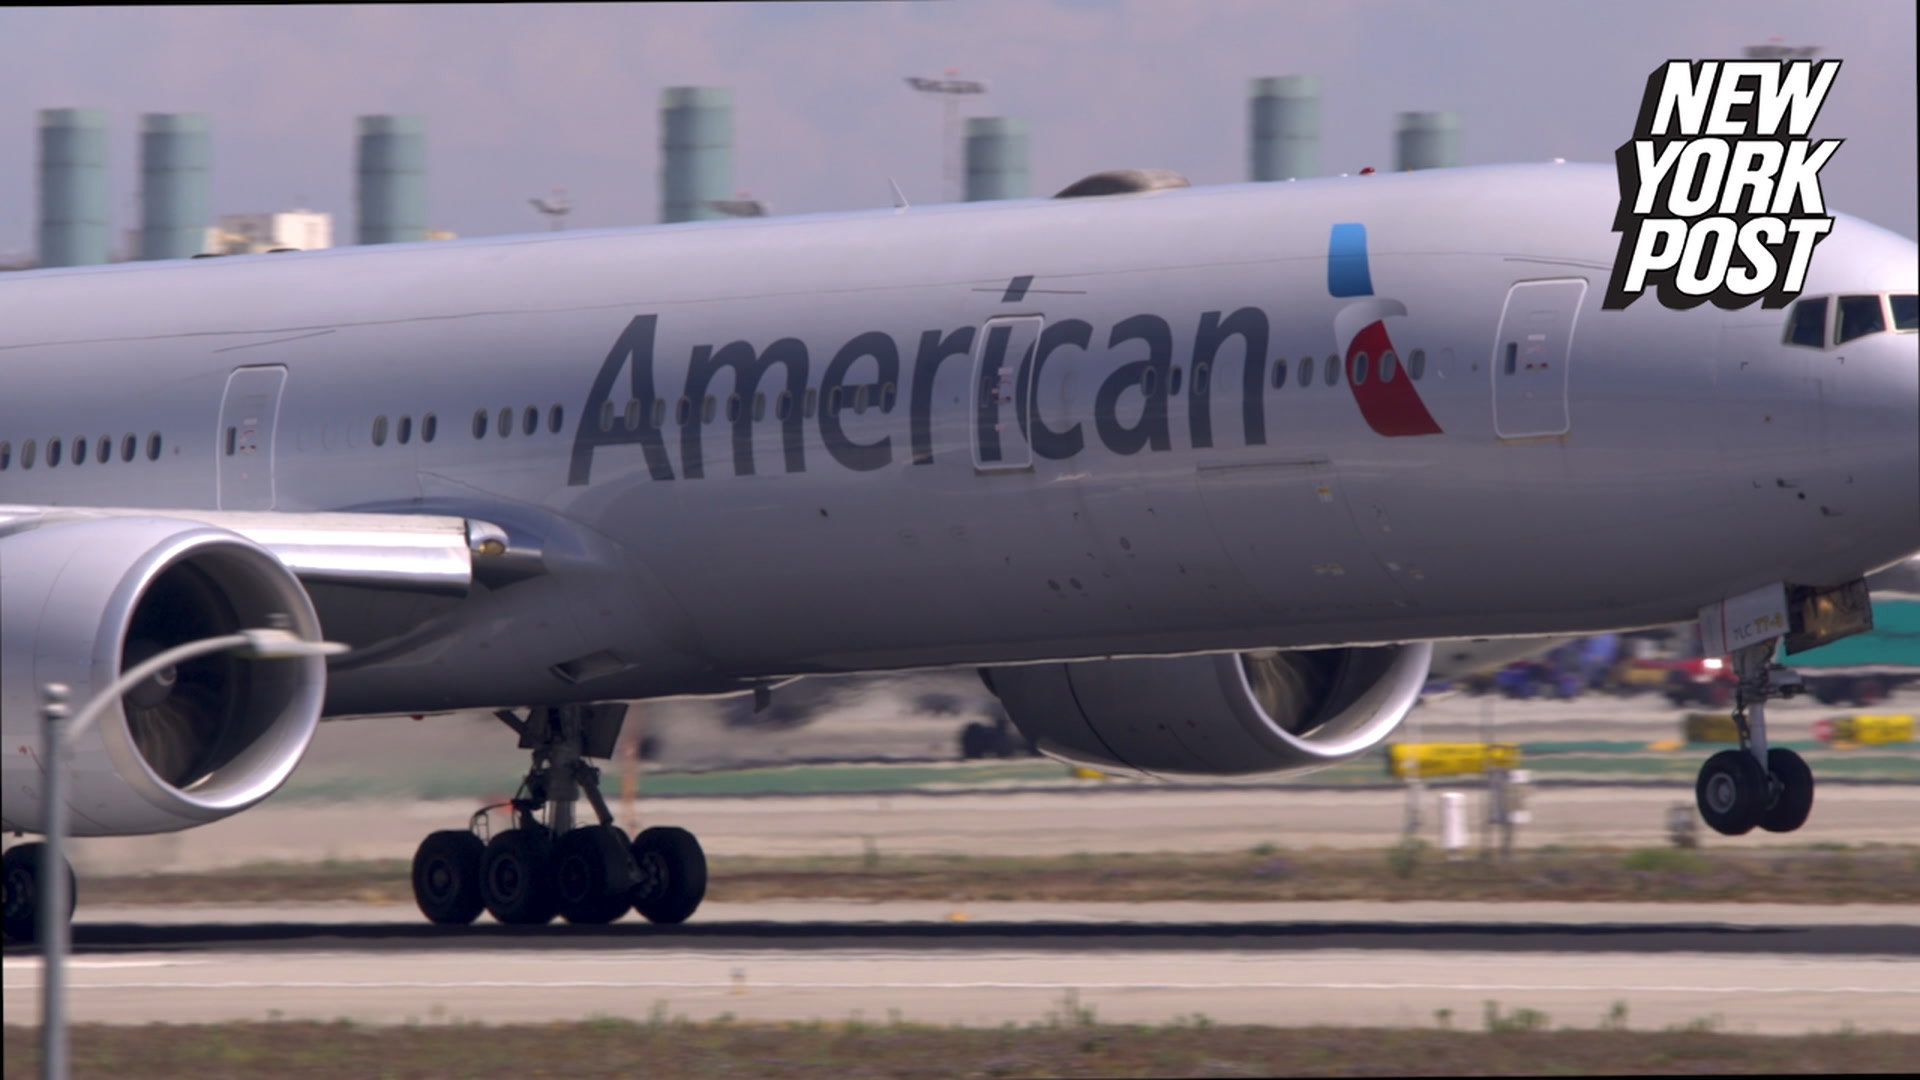 Excessively farting passenger forces American Airlines flight to turn